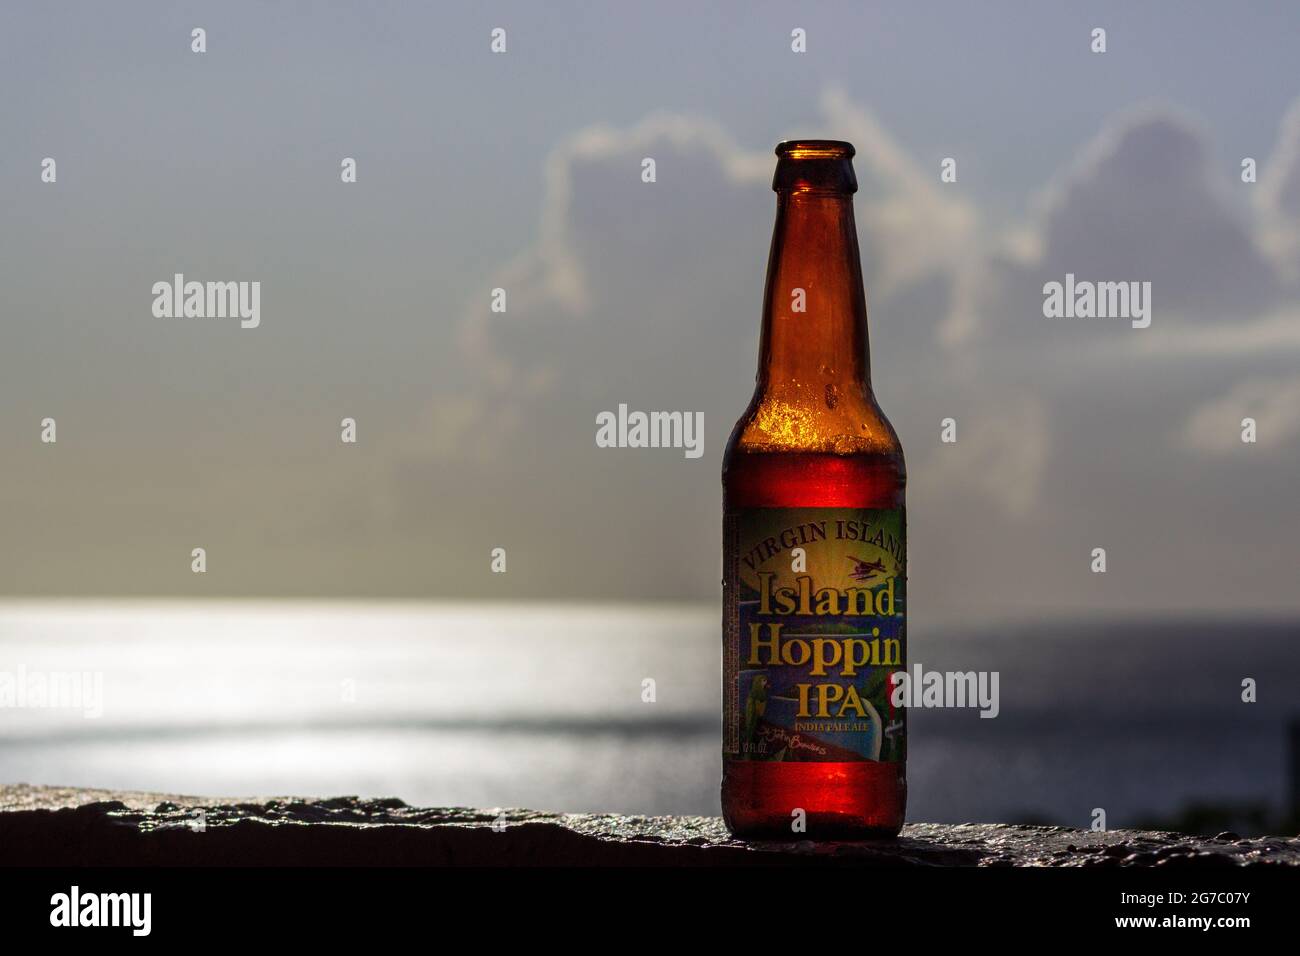 An ice cold Island Hoppin' IPA by St. John Brewers awaiting, with the glittering Caribbean Sea in the background equals a spectacular vacation. Stock Photo